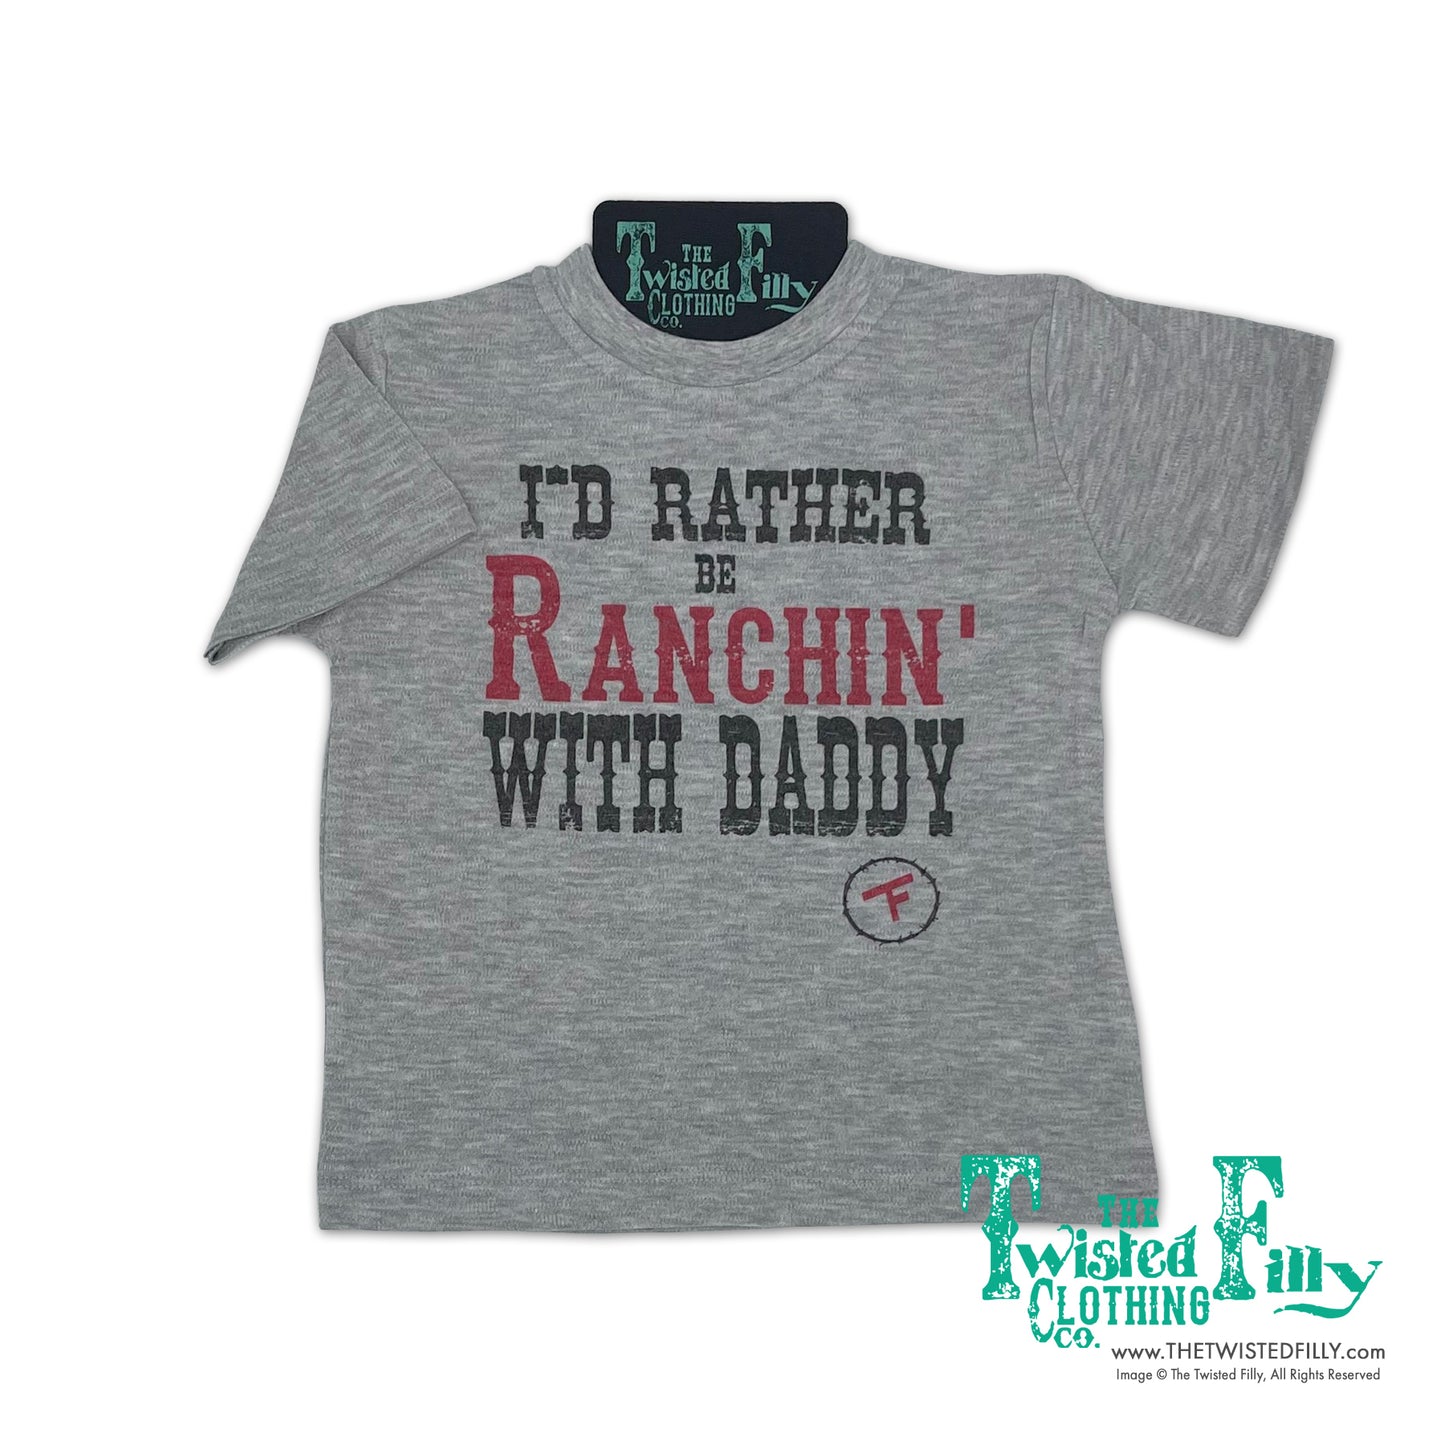 I'd Rather Be Ranchin' with Daddy - S/S Infant Tee - Gray